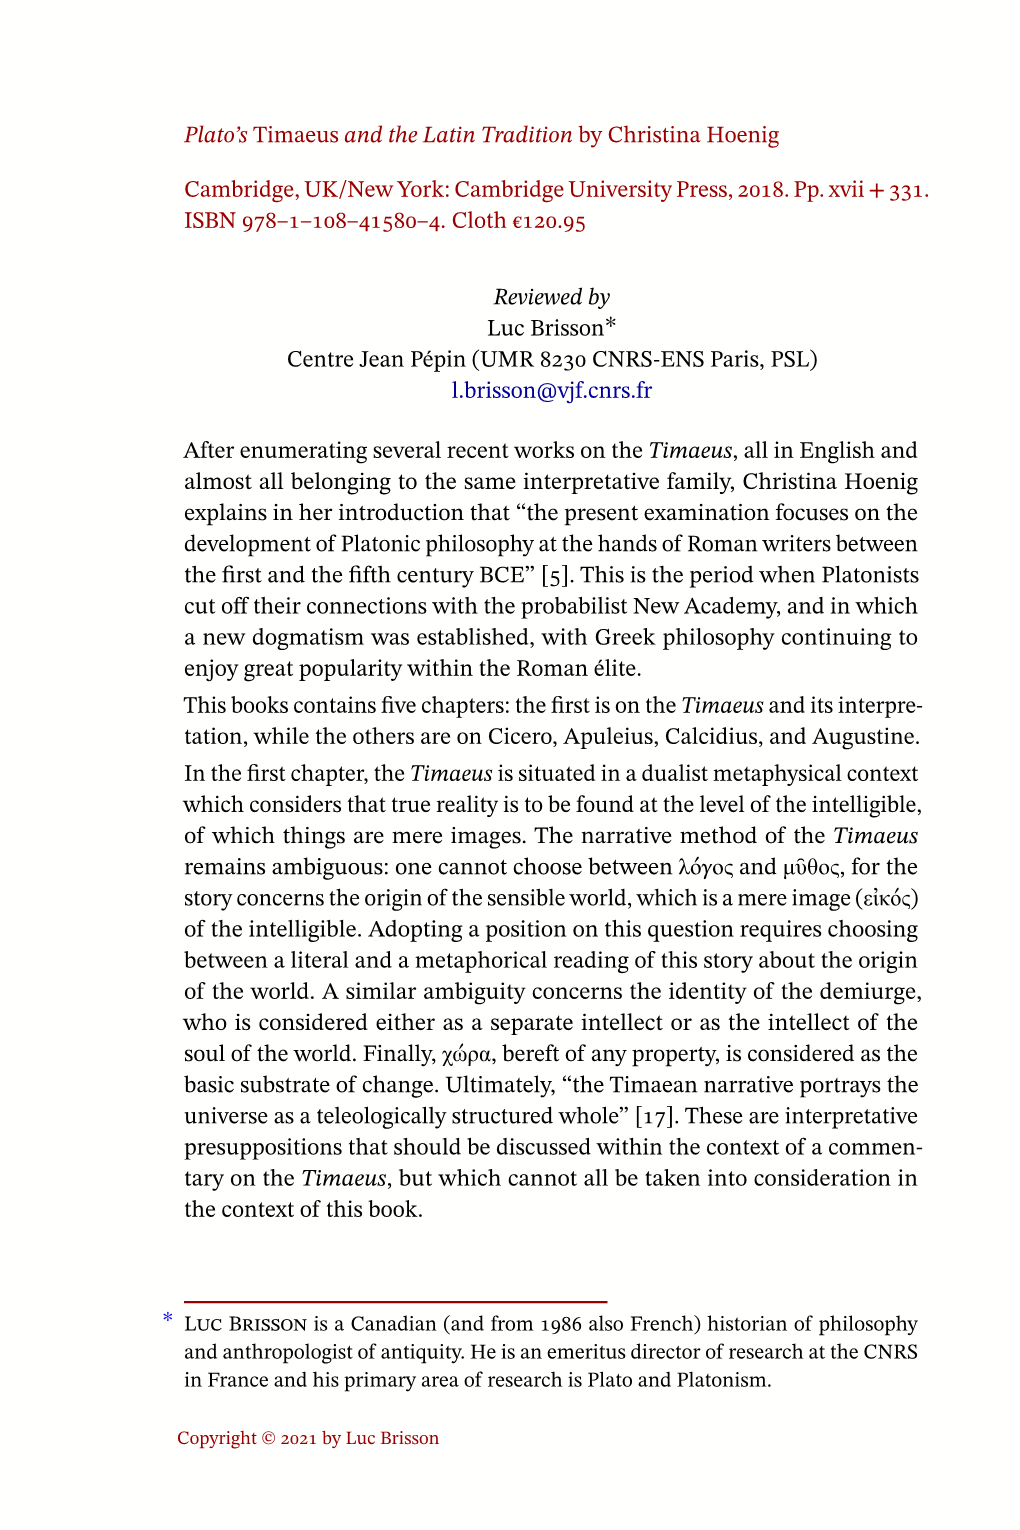 Plato's Timaeus and the Latin Tradition by Christina Hoenig